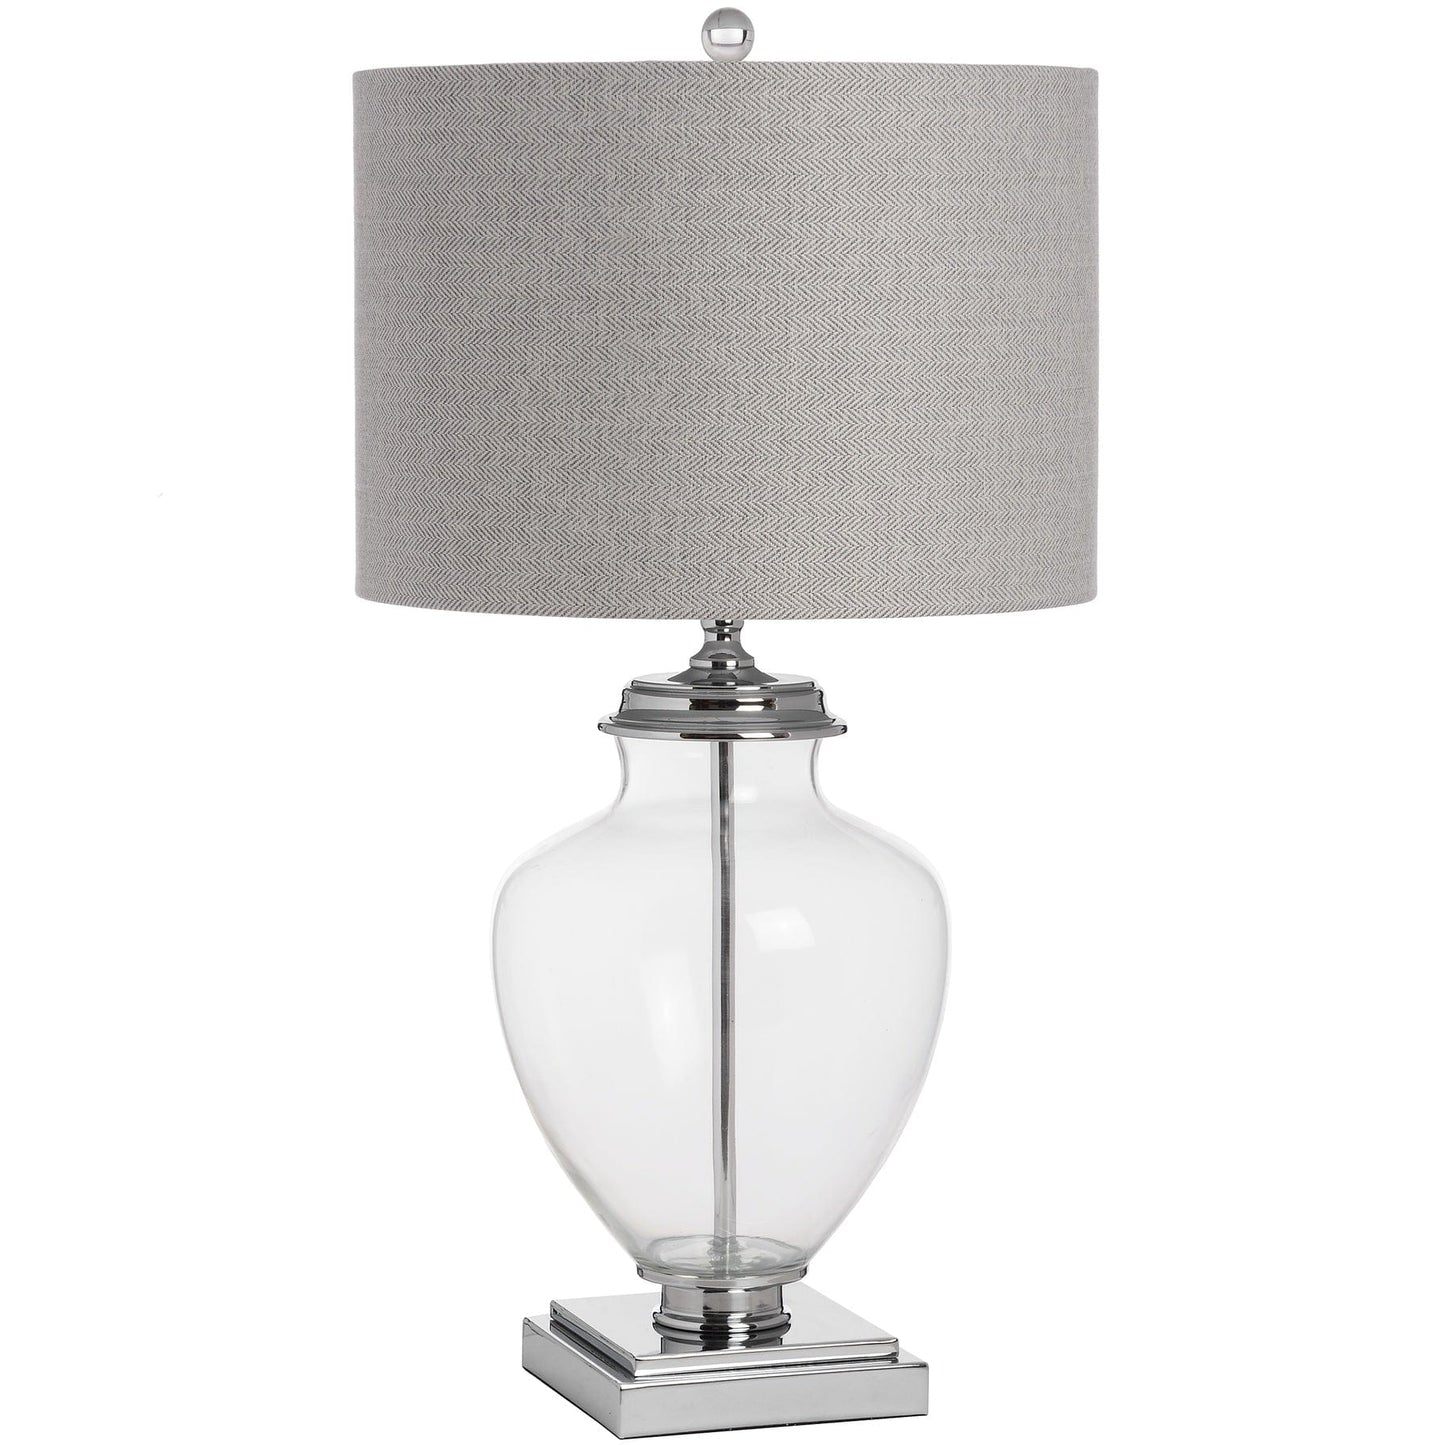 Hill Interiors Table Lamp Perugia Glass Table lamp